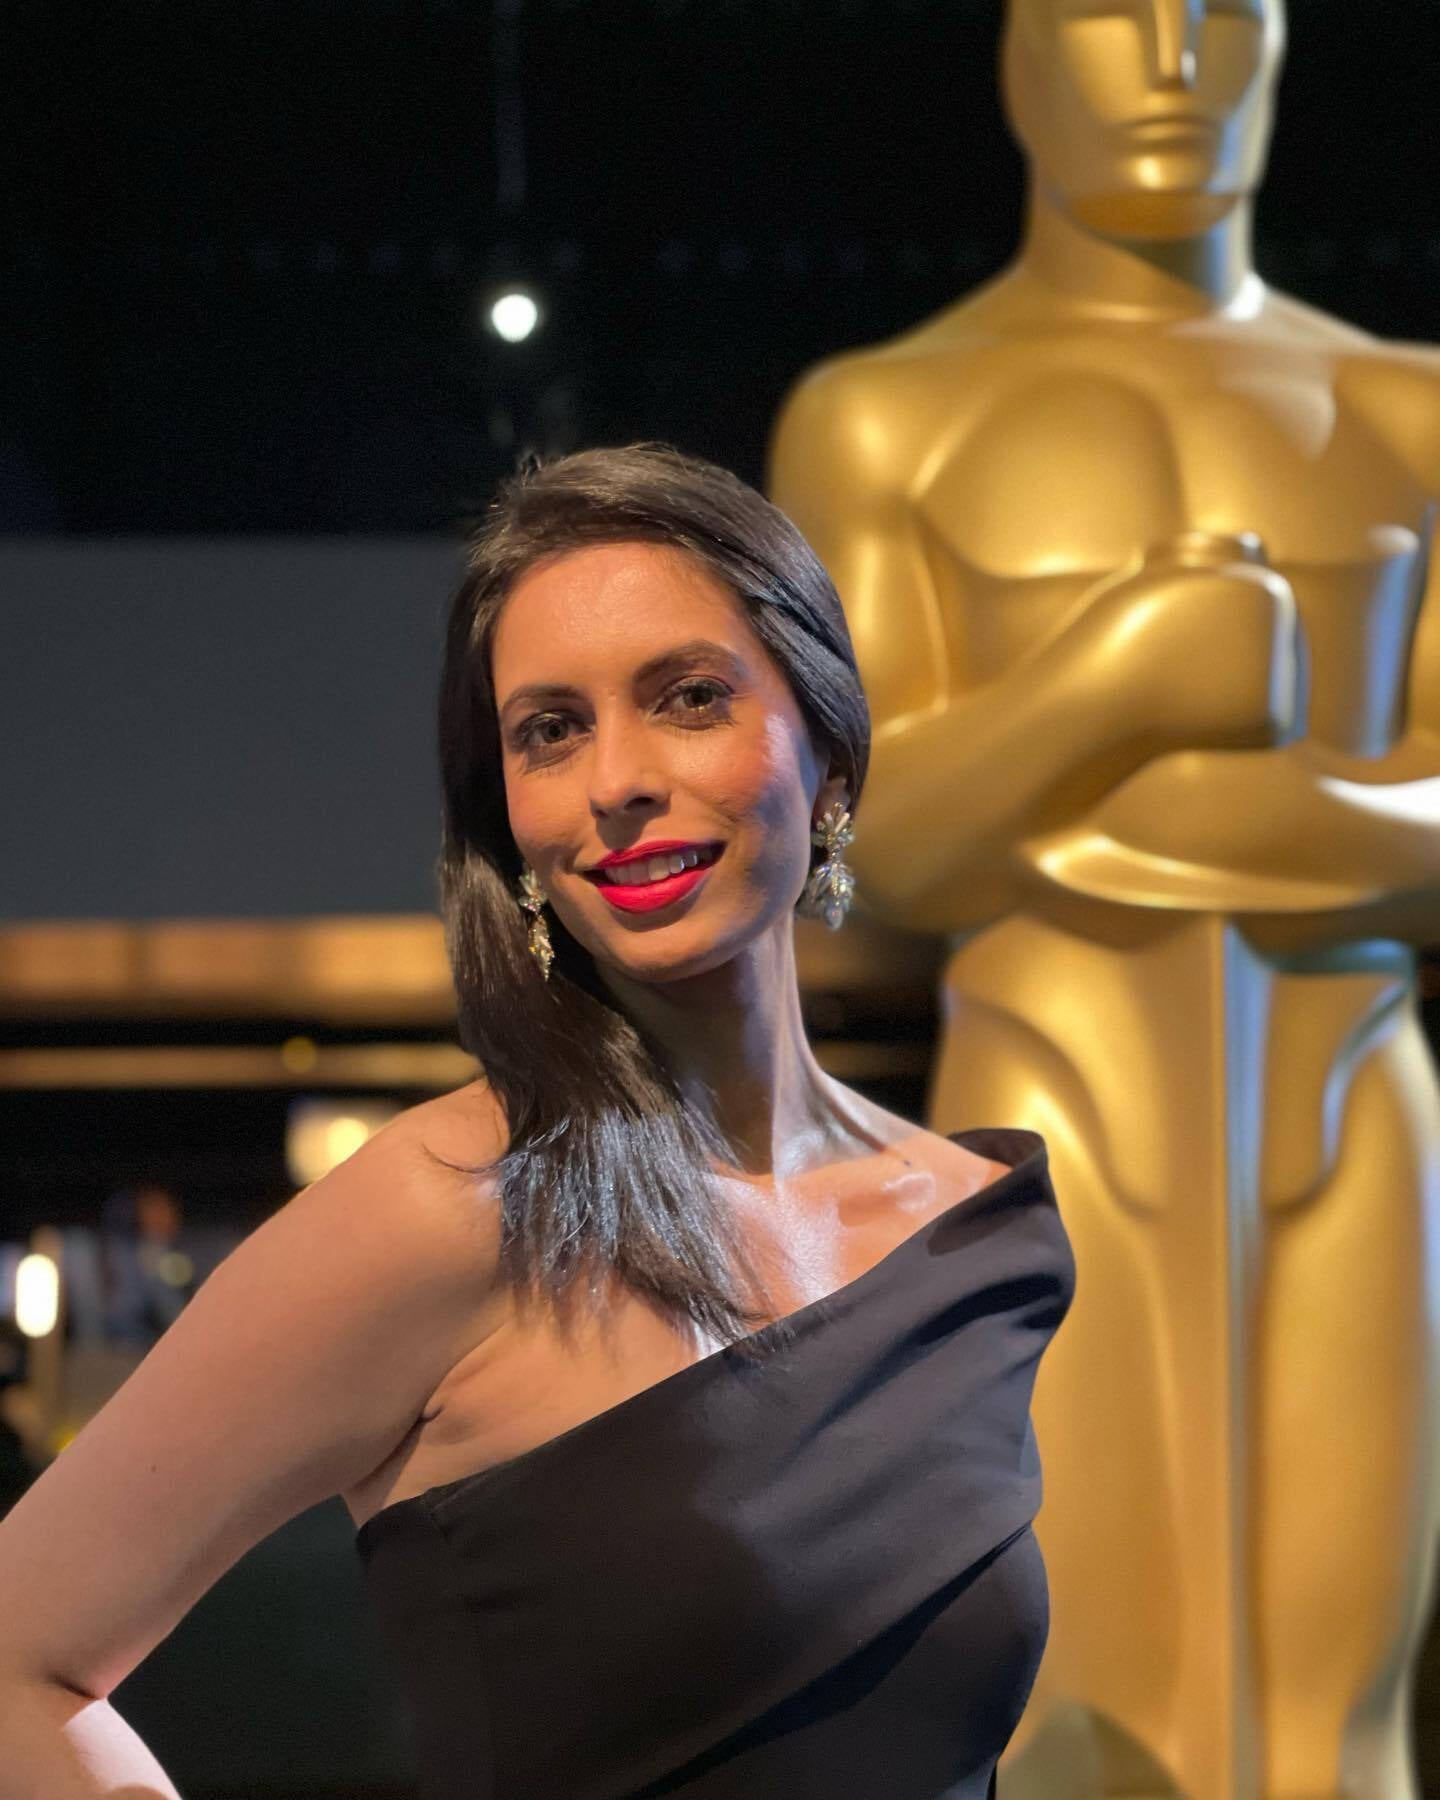 A Beautiful Indian Woman Posing With The Academy Award Oscar Statue At The 93Rd Academy Awards.